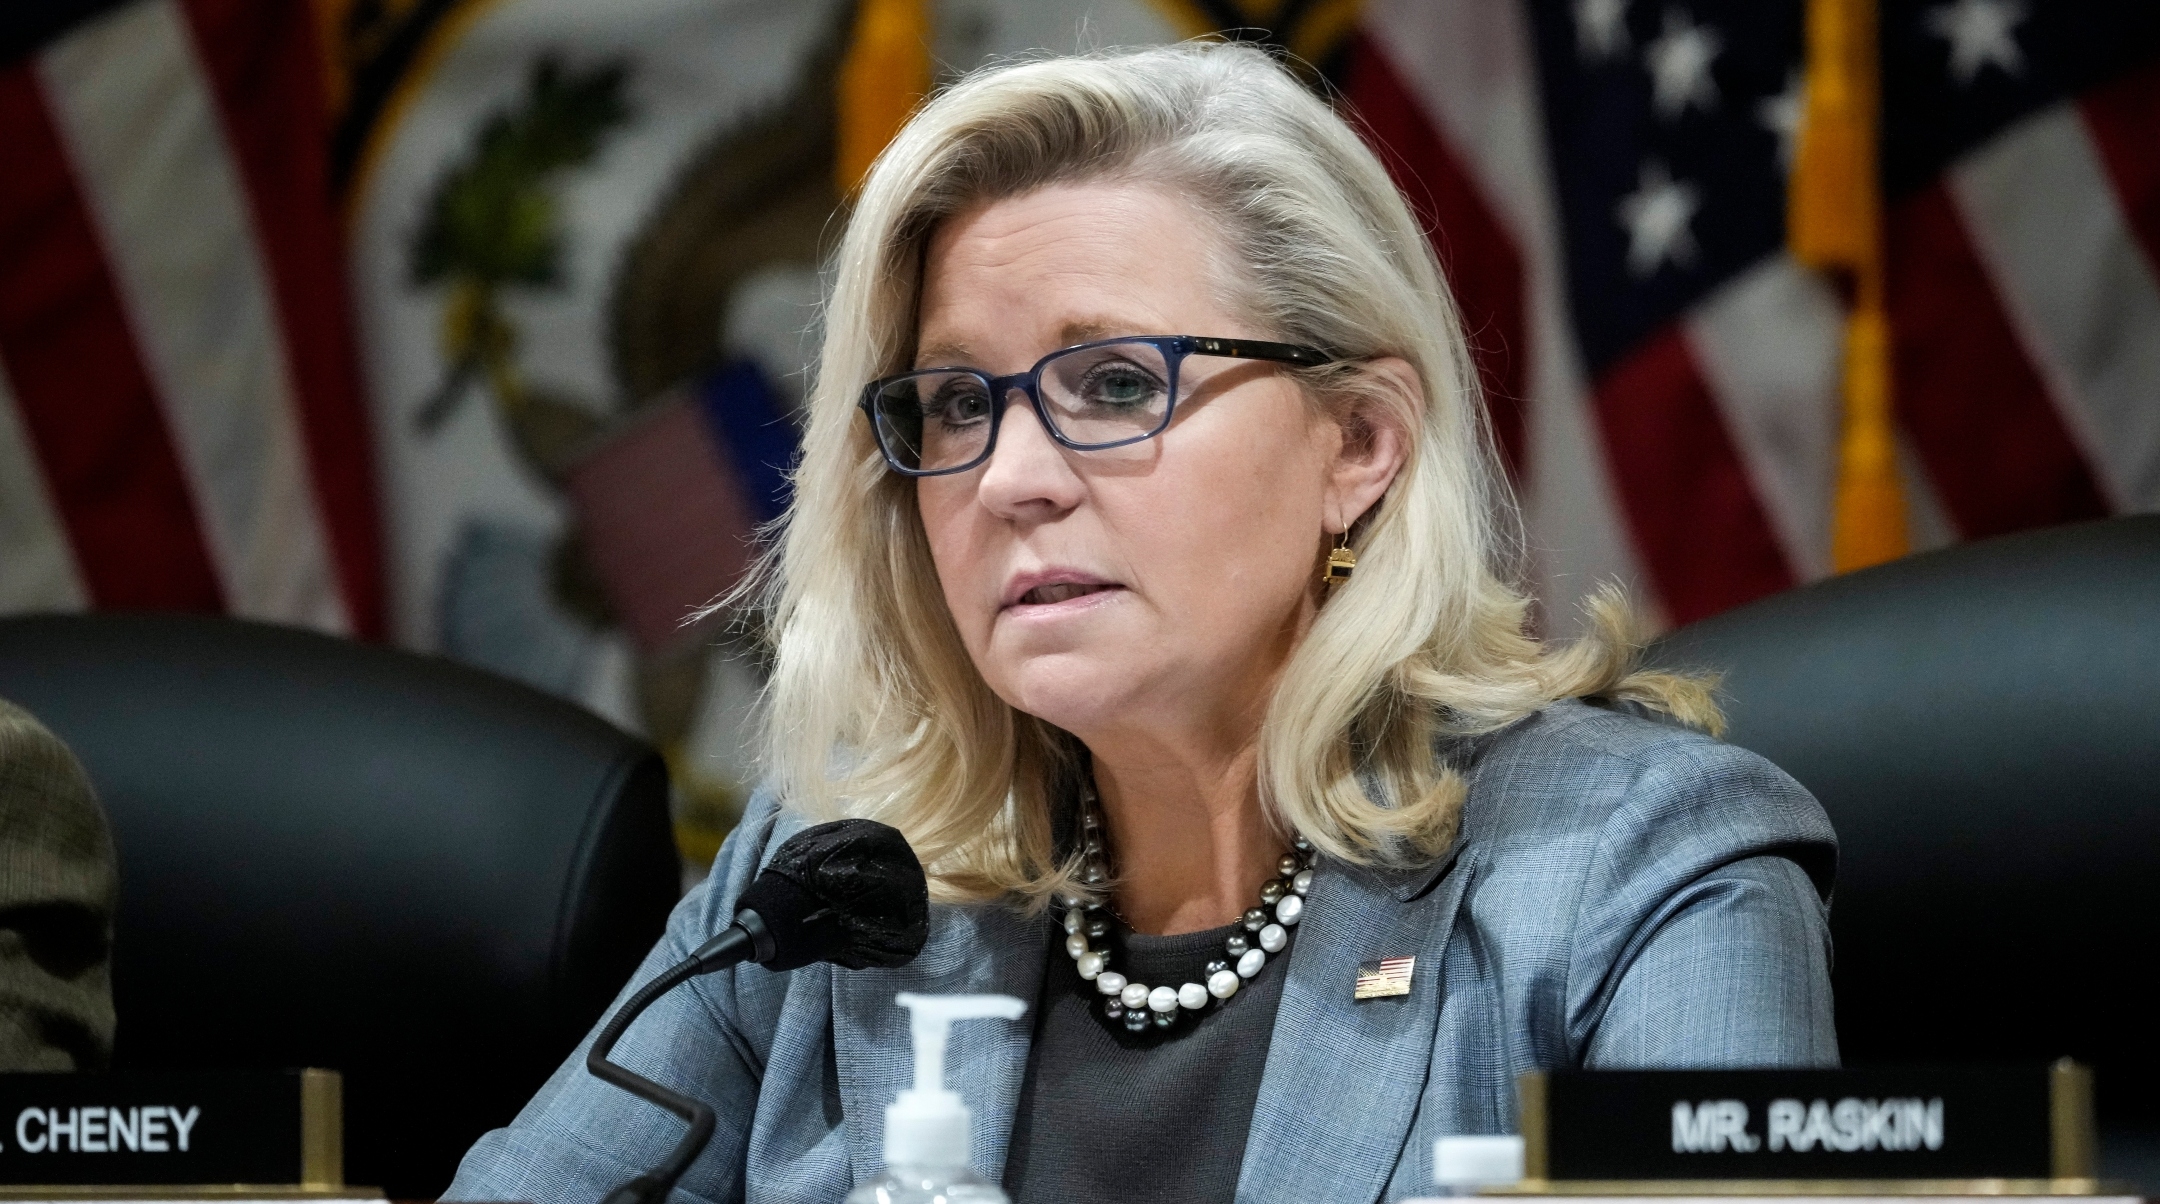 Rep. Liz Cheney speaks during a Select Committee to Investigate the Jan. 6 Attack on the U.S. Capitol meeting on Capitol Hill, March 28, 2022. (Drew Angerer/Getty Images)